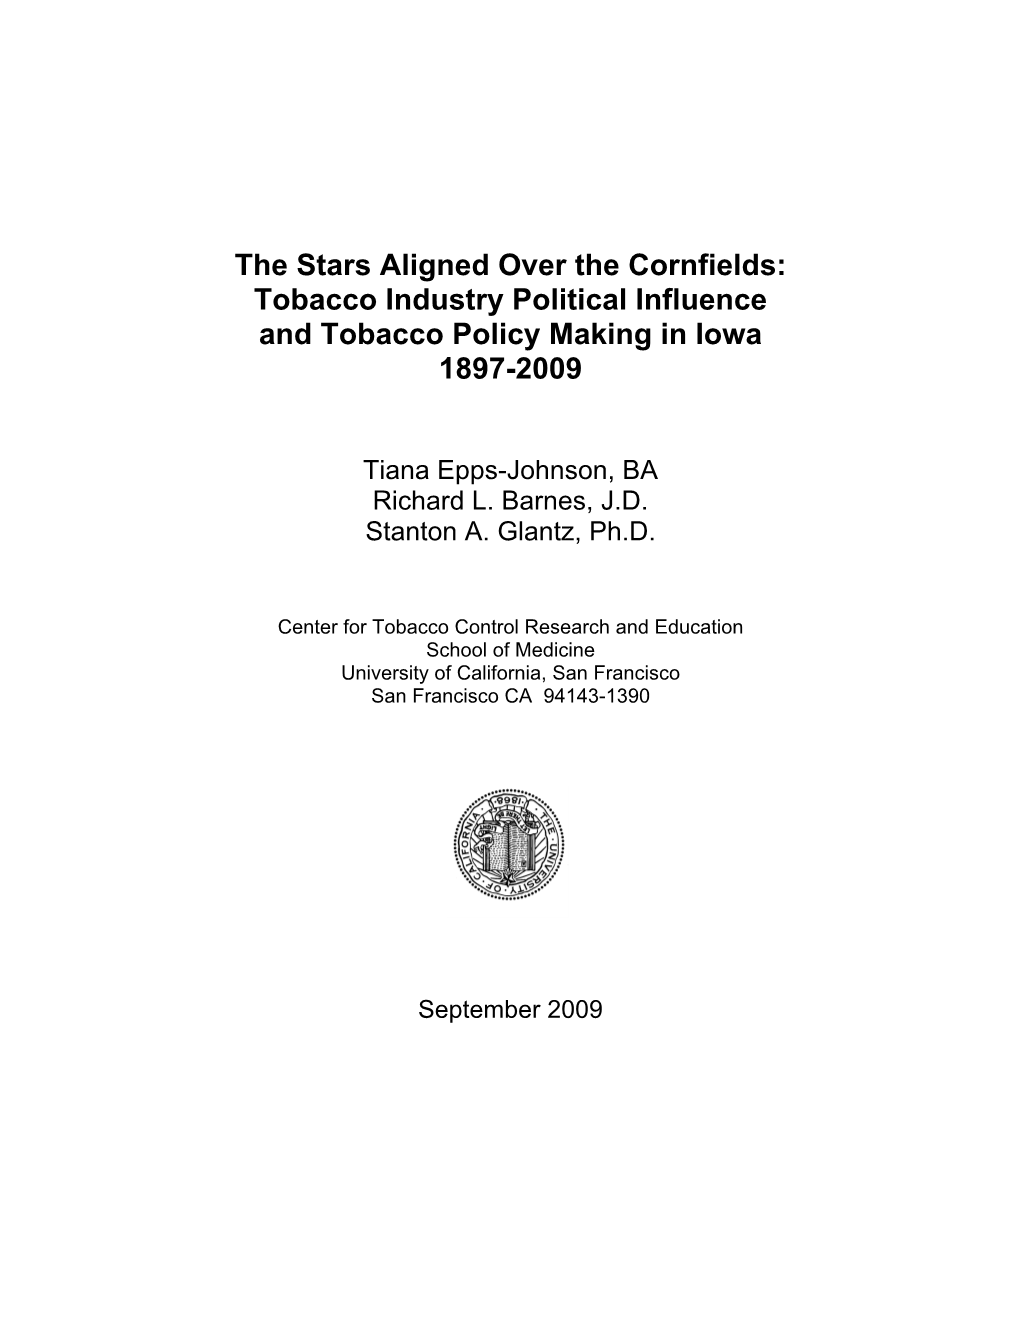 Tobacco Industry Political Influence and Tobacco Policy Making in Iowa 1897-2009